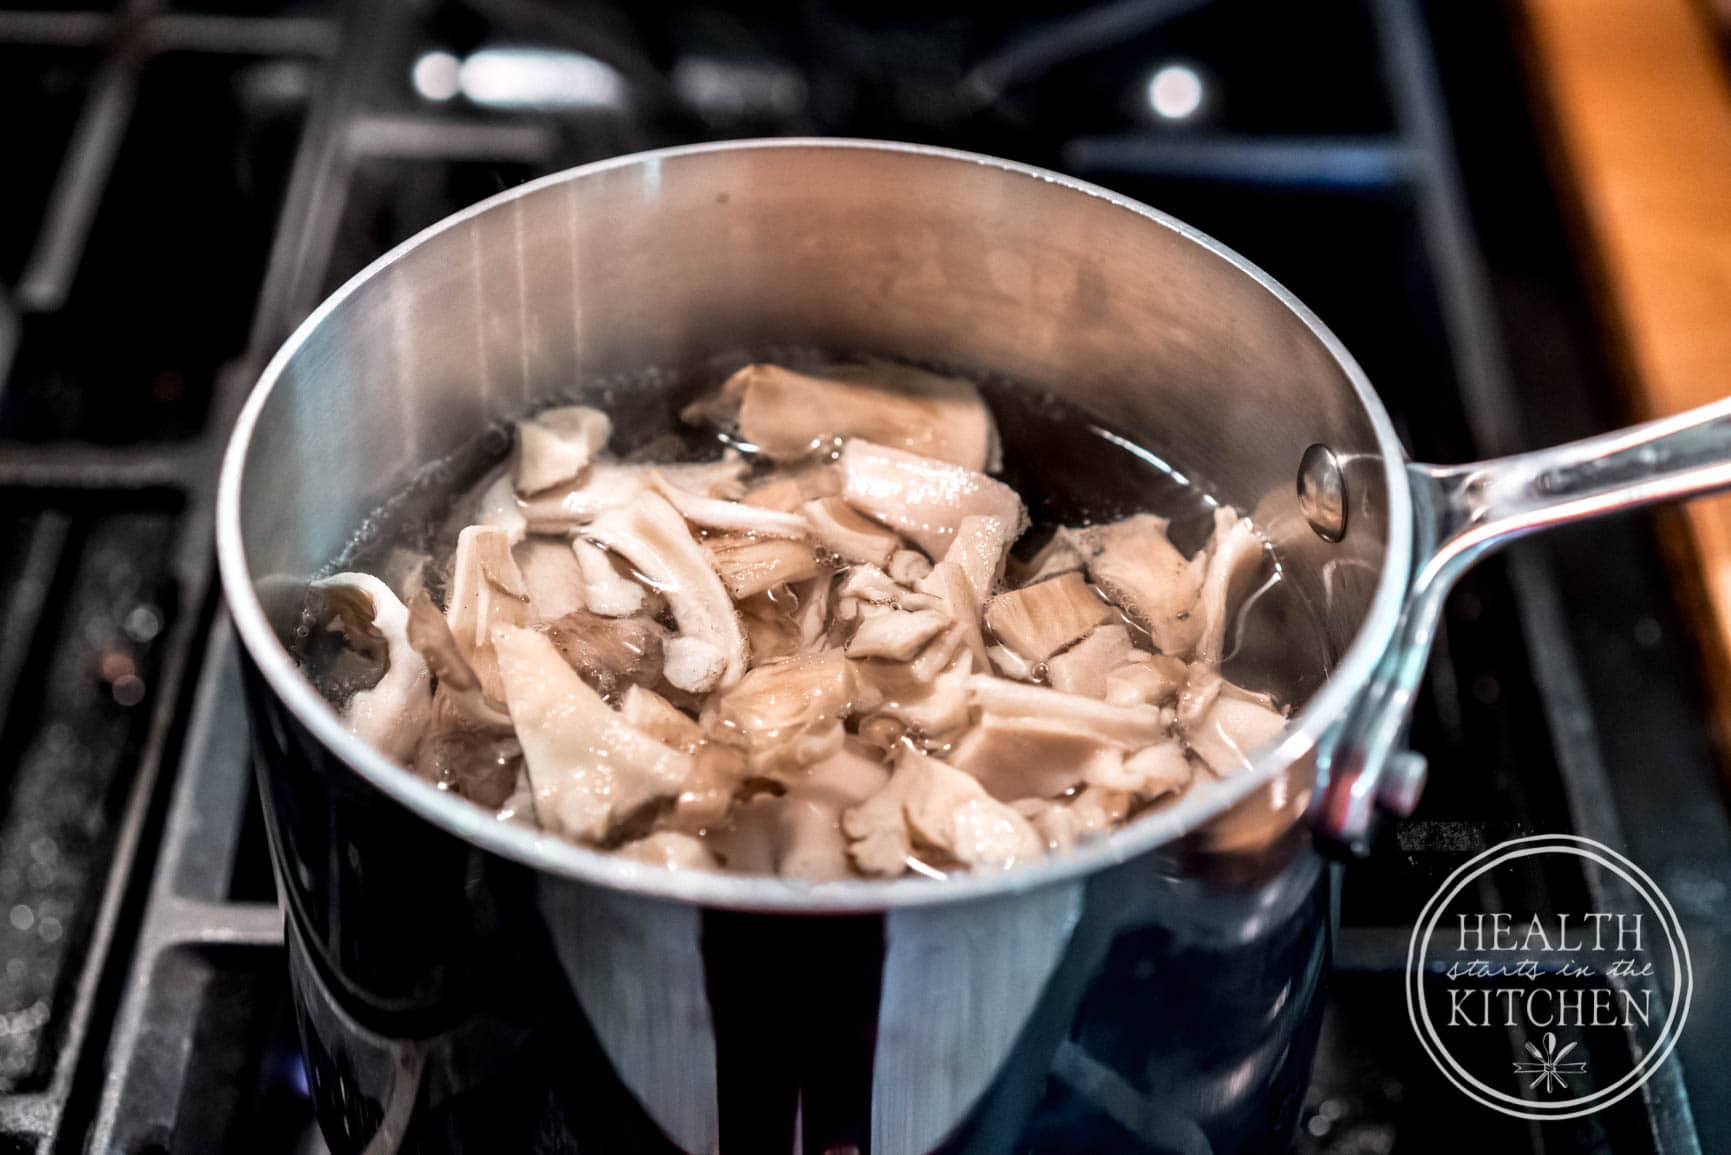 How to Can Maitake Hen of the Woods Mushrooms {Grifola Frondosa}